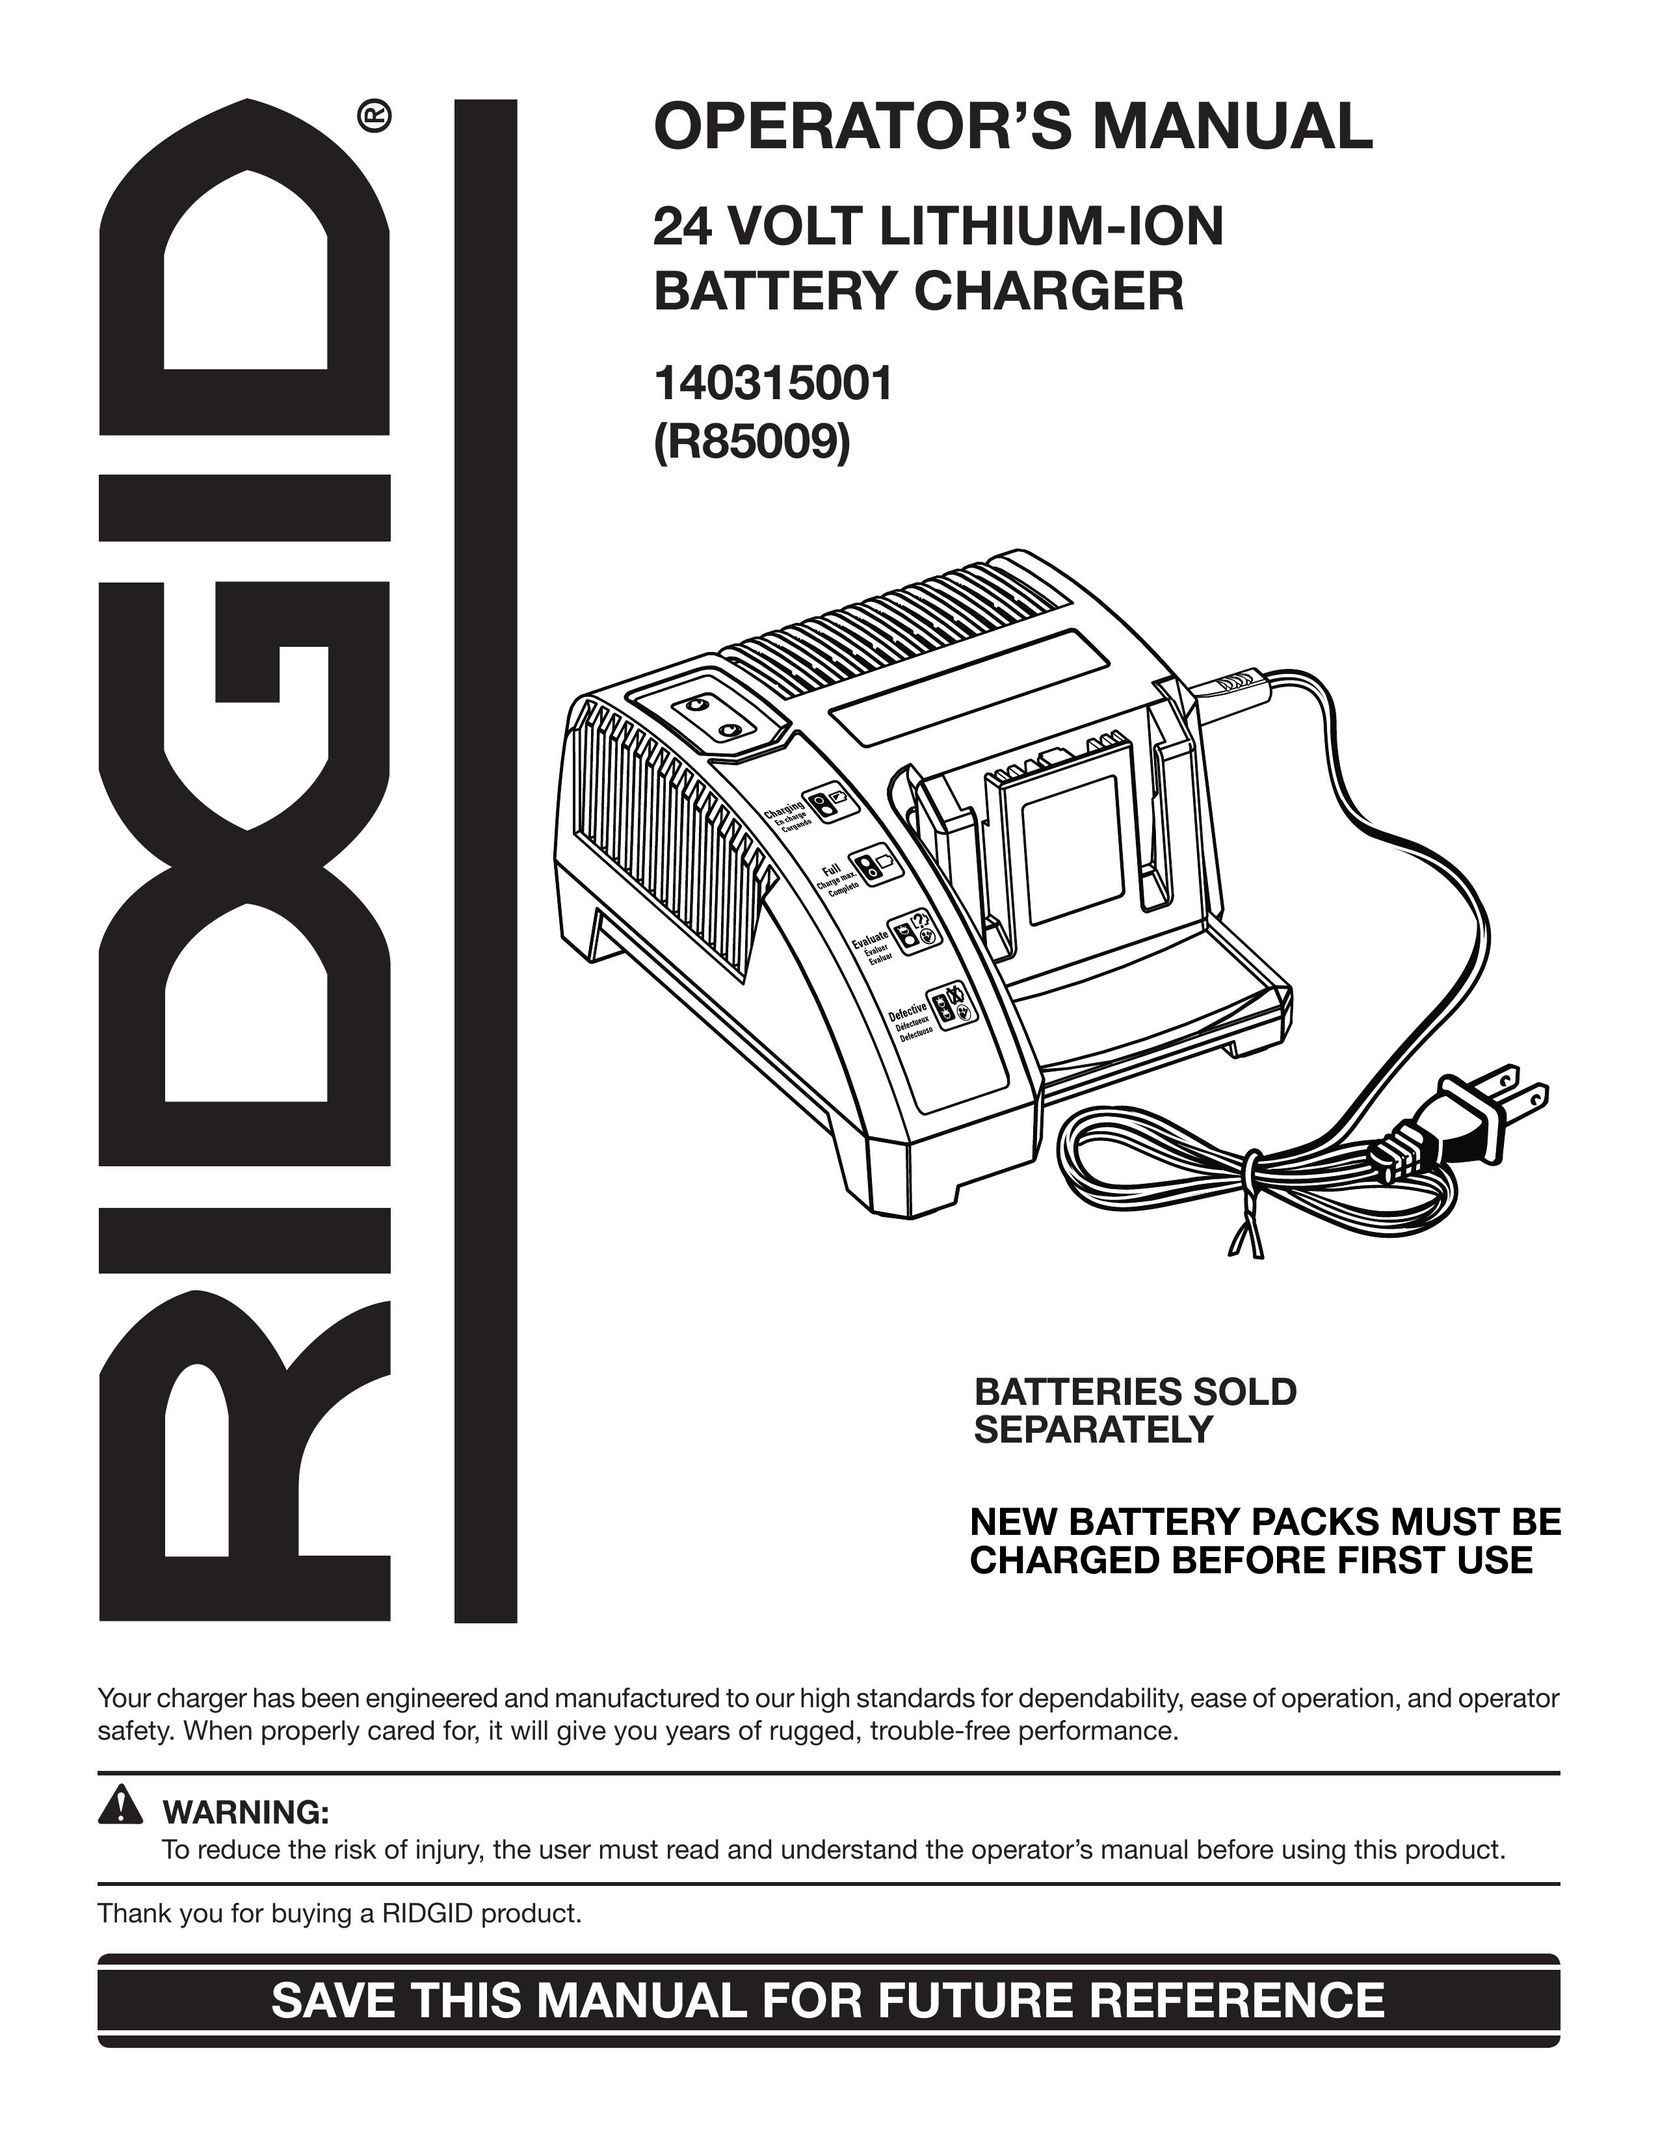 RIDGID R85009 Battery Charger User Manual